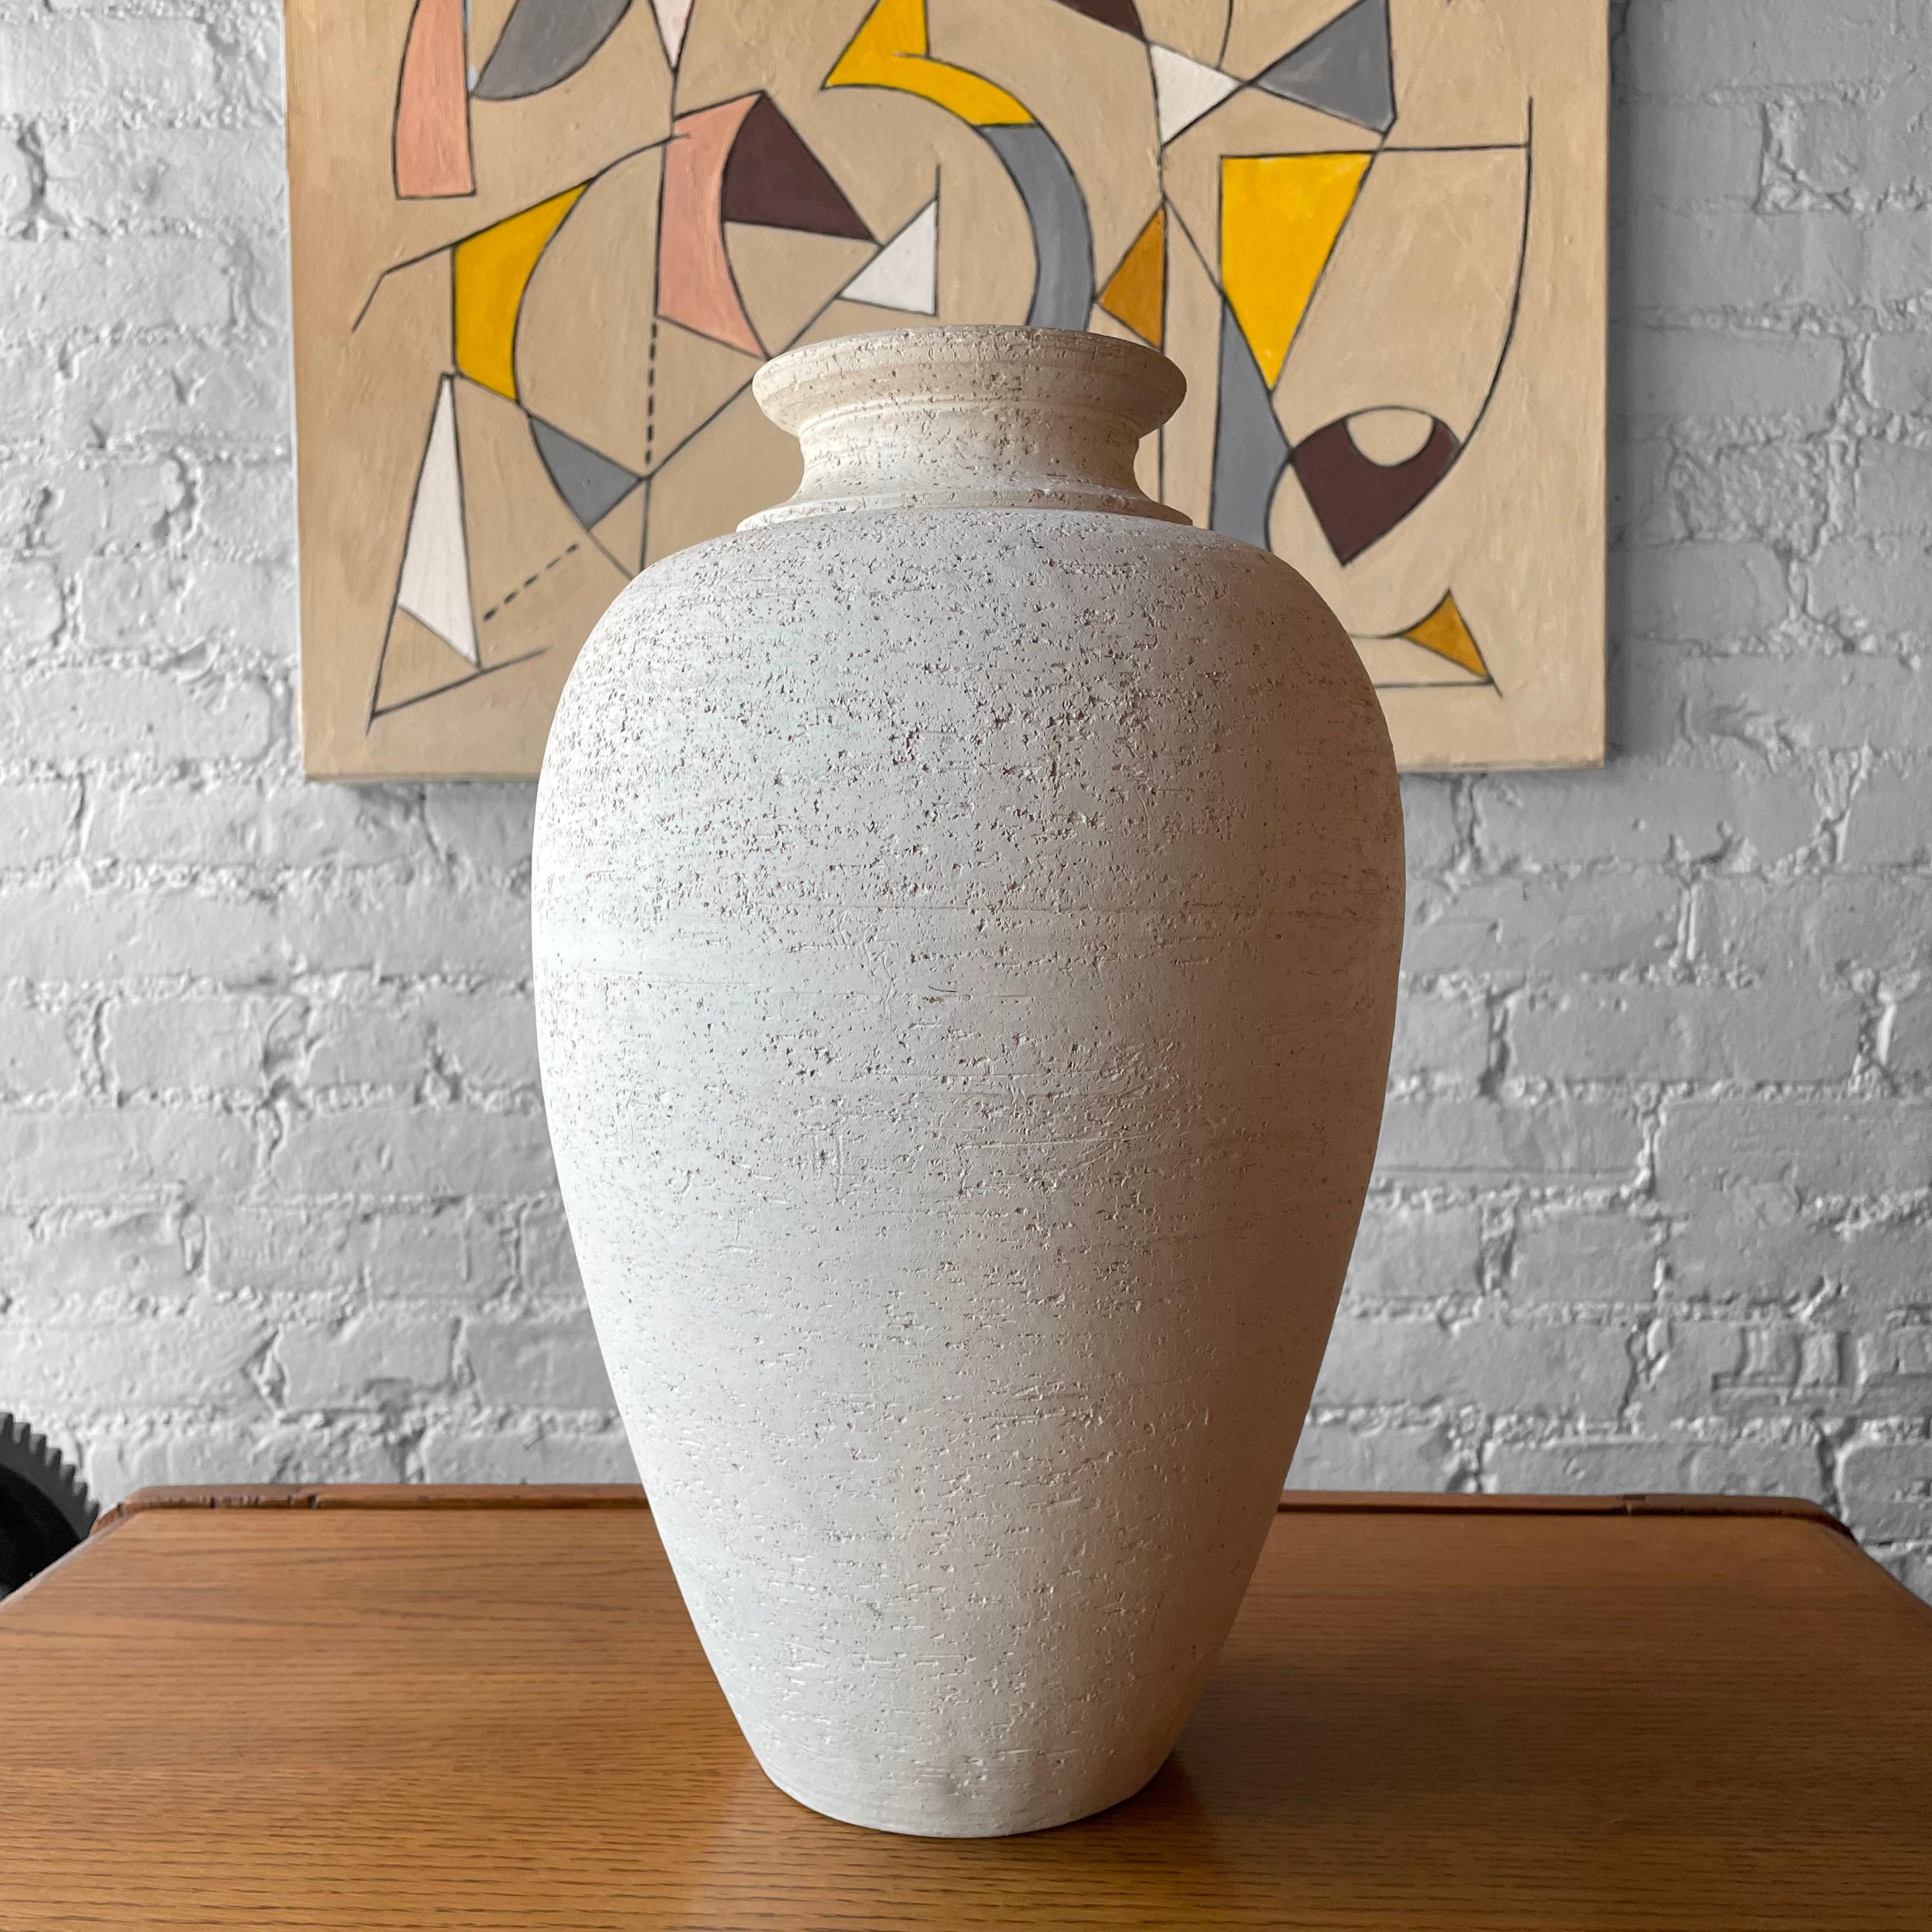 Large, Italian, mid-century, earthenware vase by Flavia Montepulo features a classical urn shaped form in a poruous, matte glaze with 3 inch mouth opening.